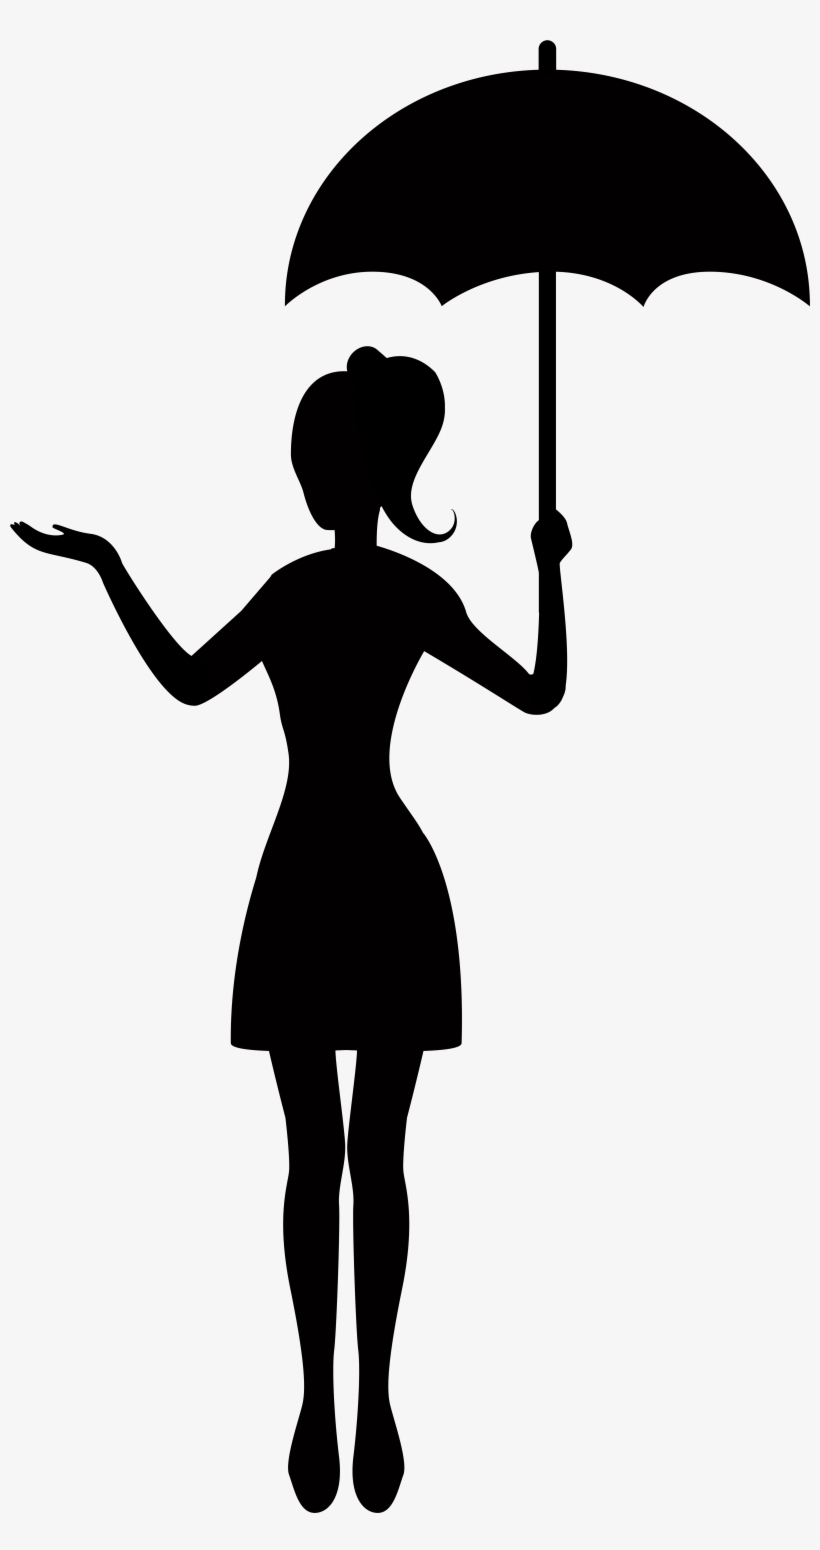 Girl With Umbrella Silhouette Png Clip Art - Black Silhouette With Umbrella, transparent png #222529